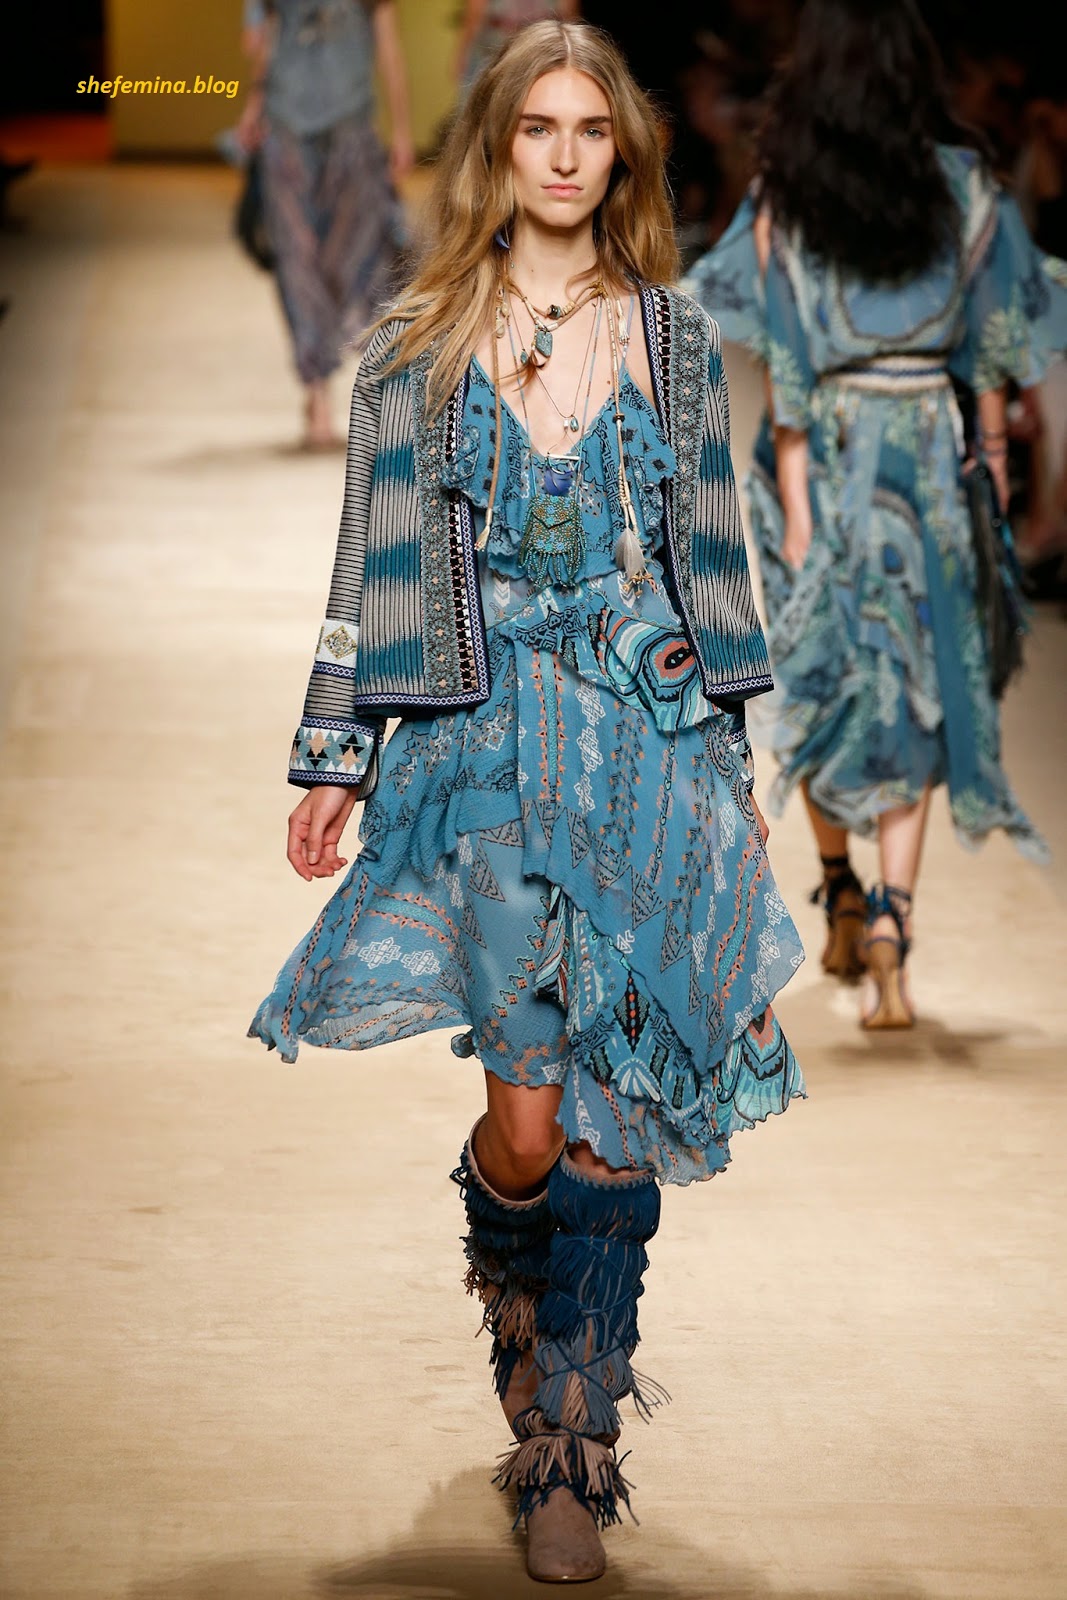 Etro Spring 2015 Ready-to-Wear Dresses Collation at Fashioh Show Runway ...